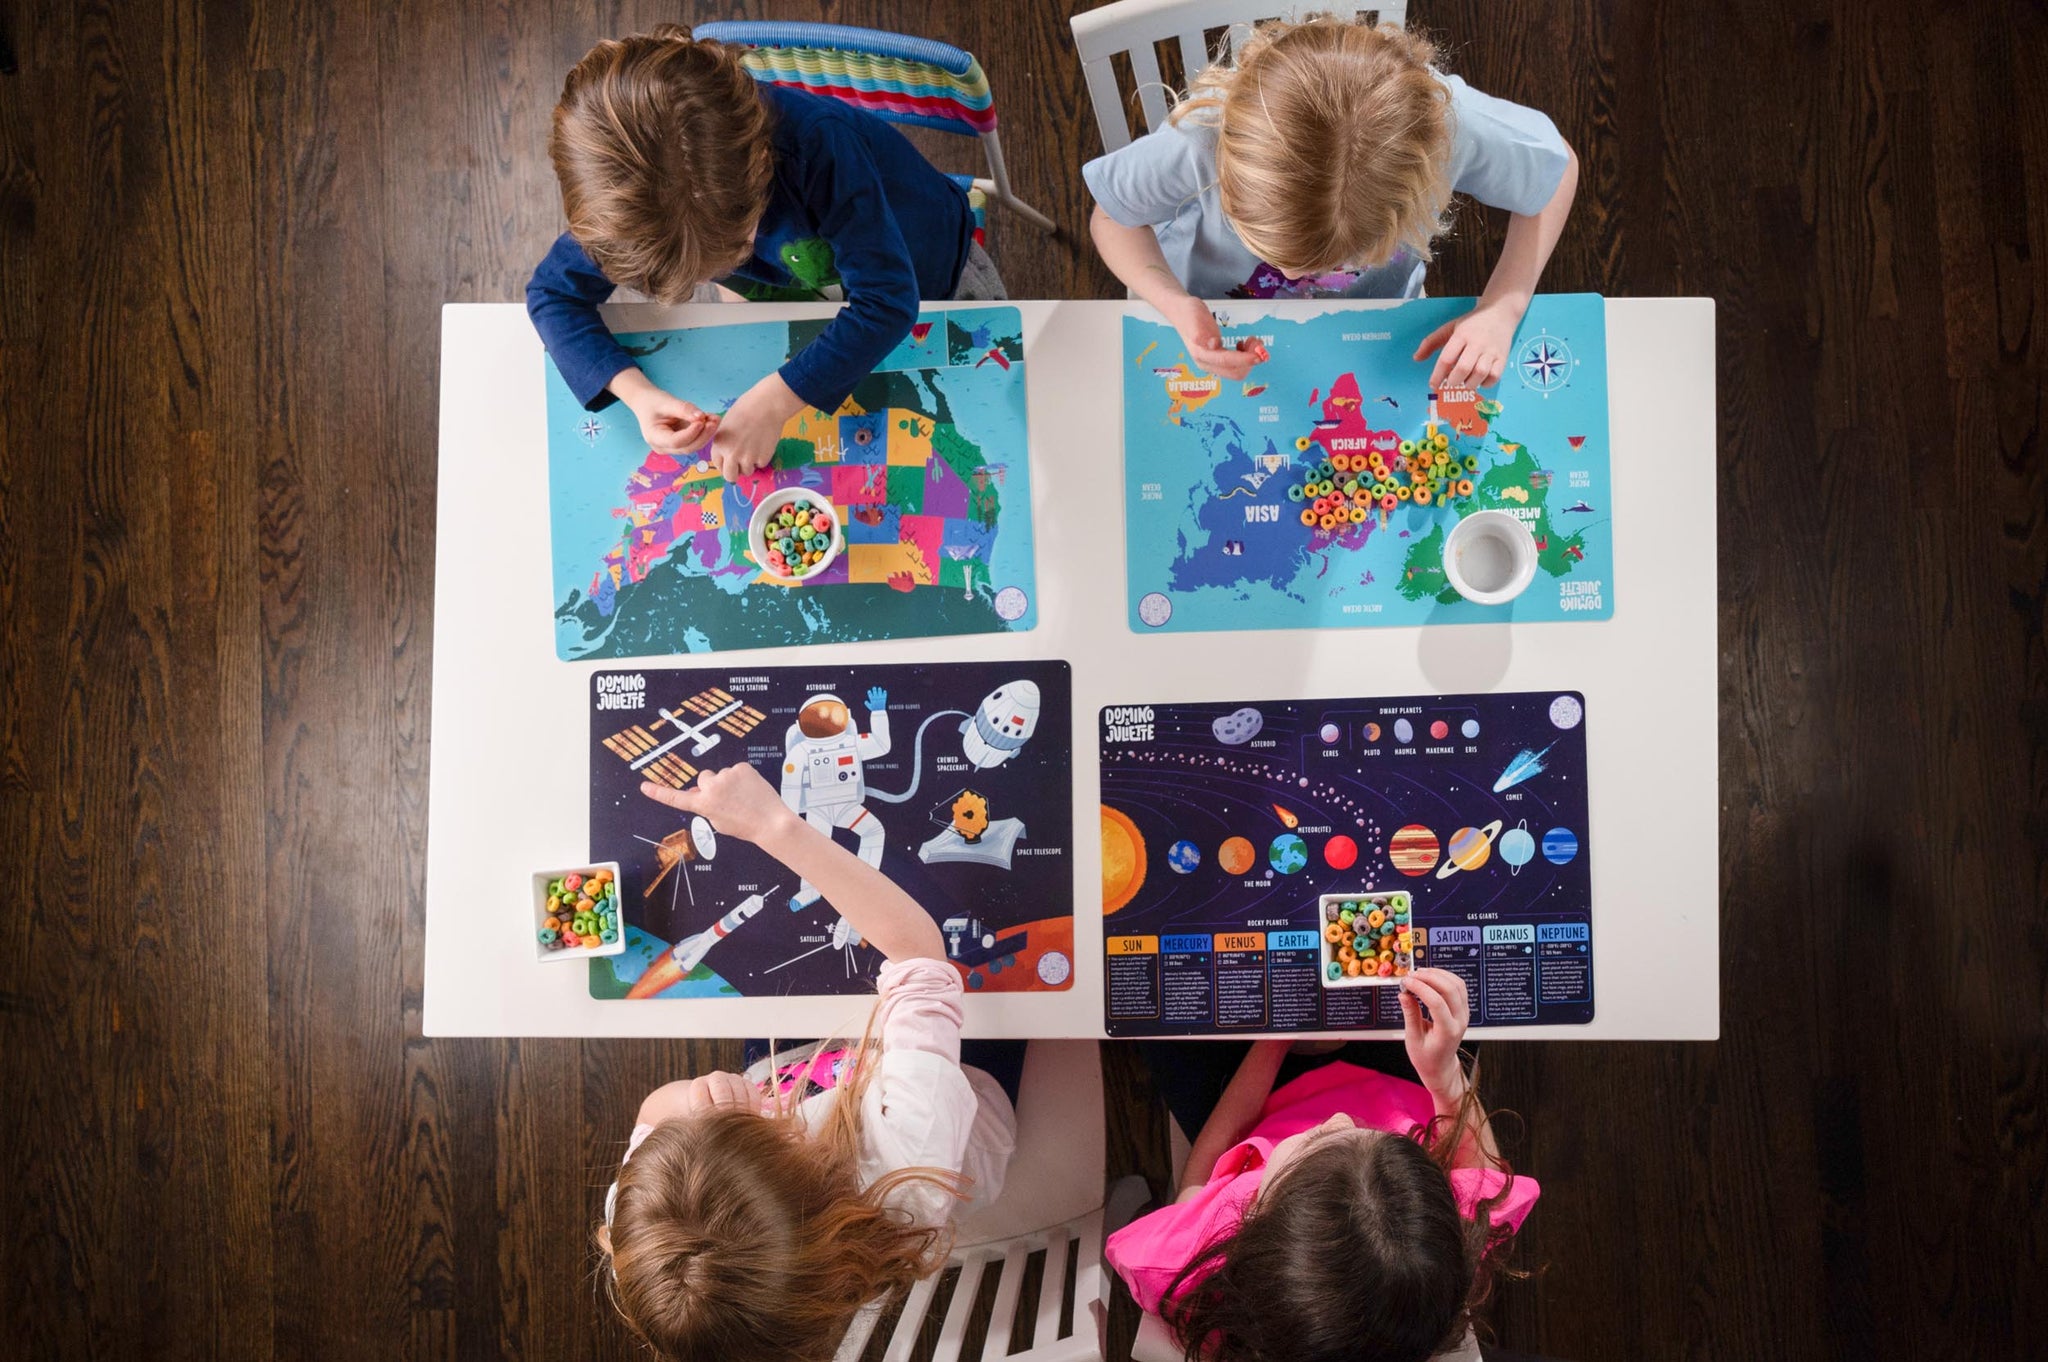 World Placemat, World Placemats, World Geography Placemat, World Geography Placemats, World Geography Placemat for Kids, Geography Placemat, Geography Placemats